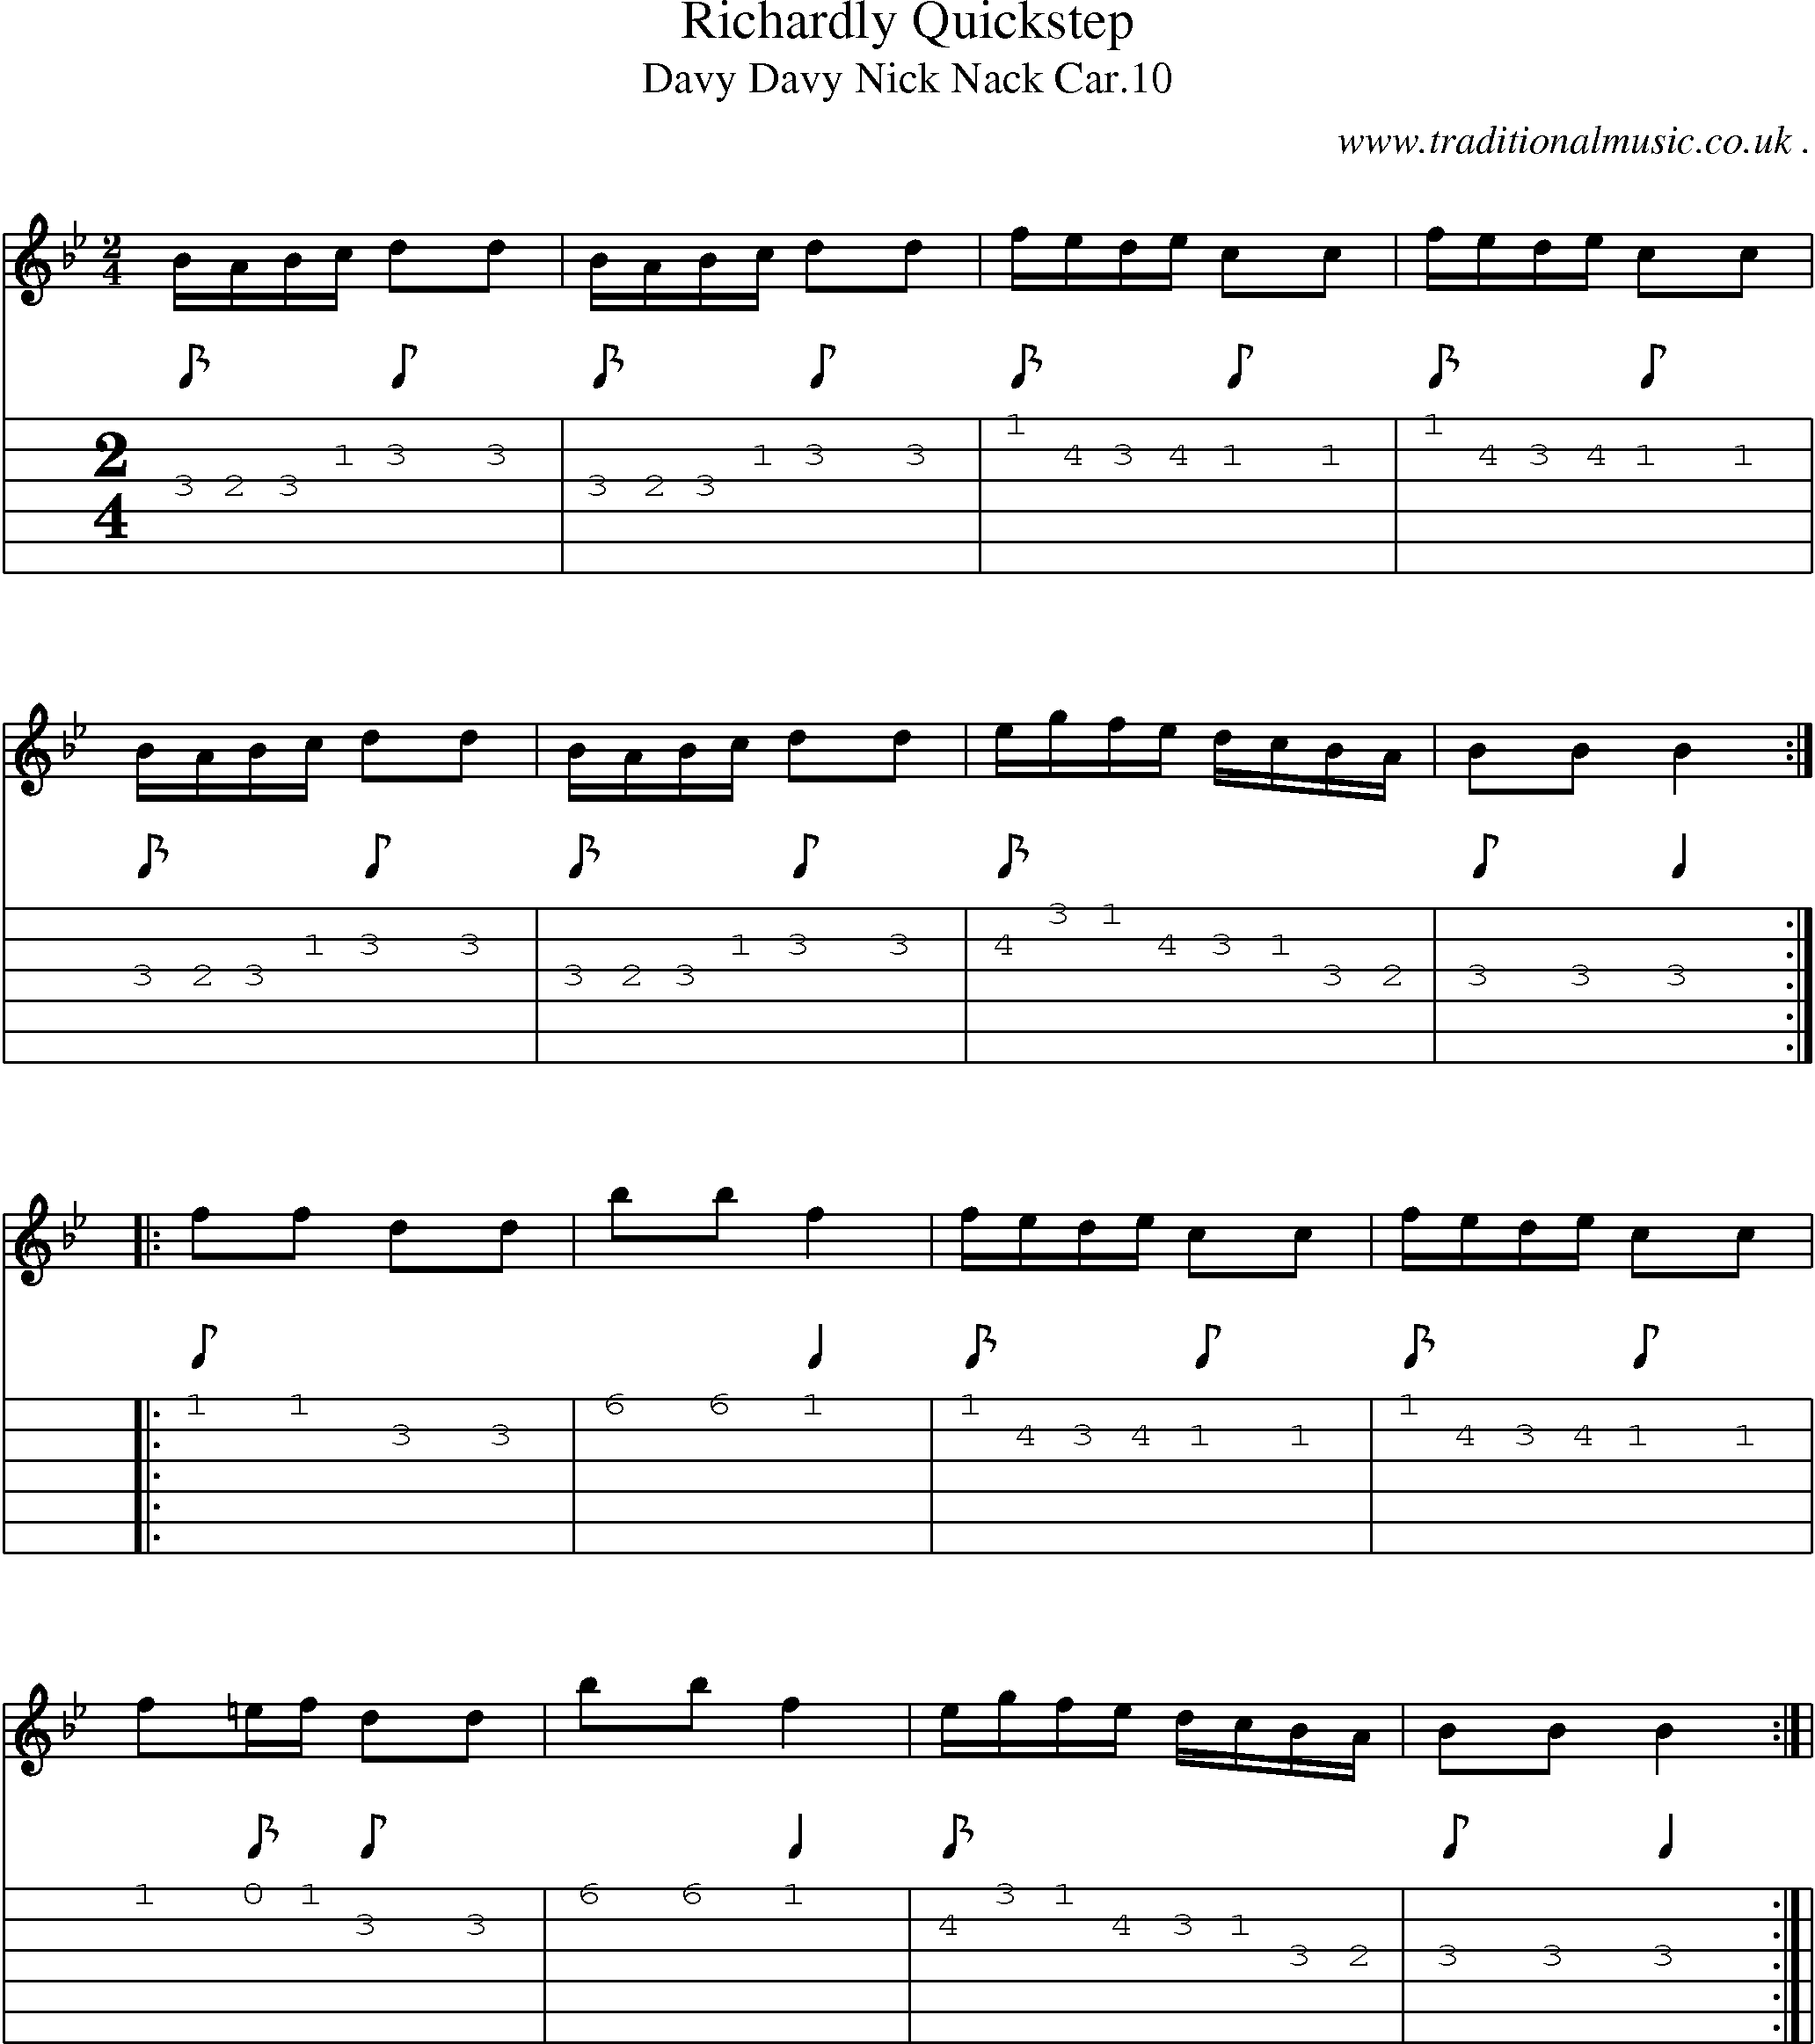 Sheet-Music and Guitar Tabs for Richardly Quickstep